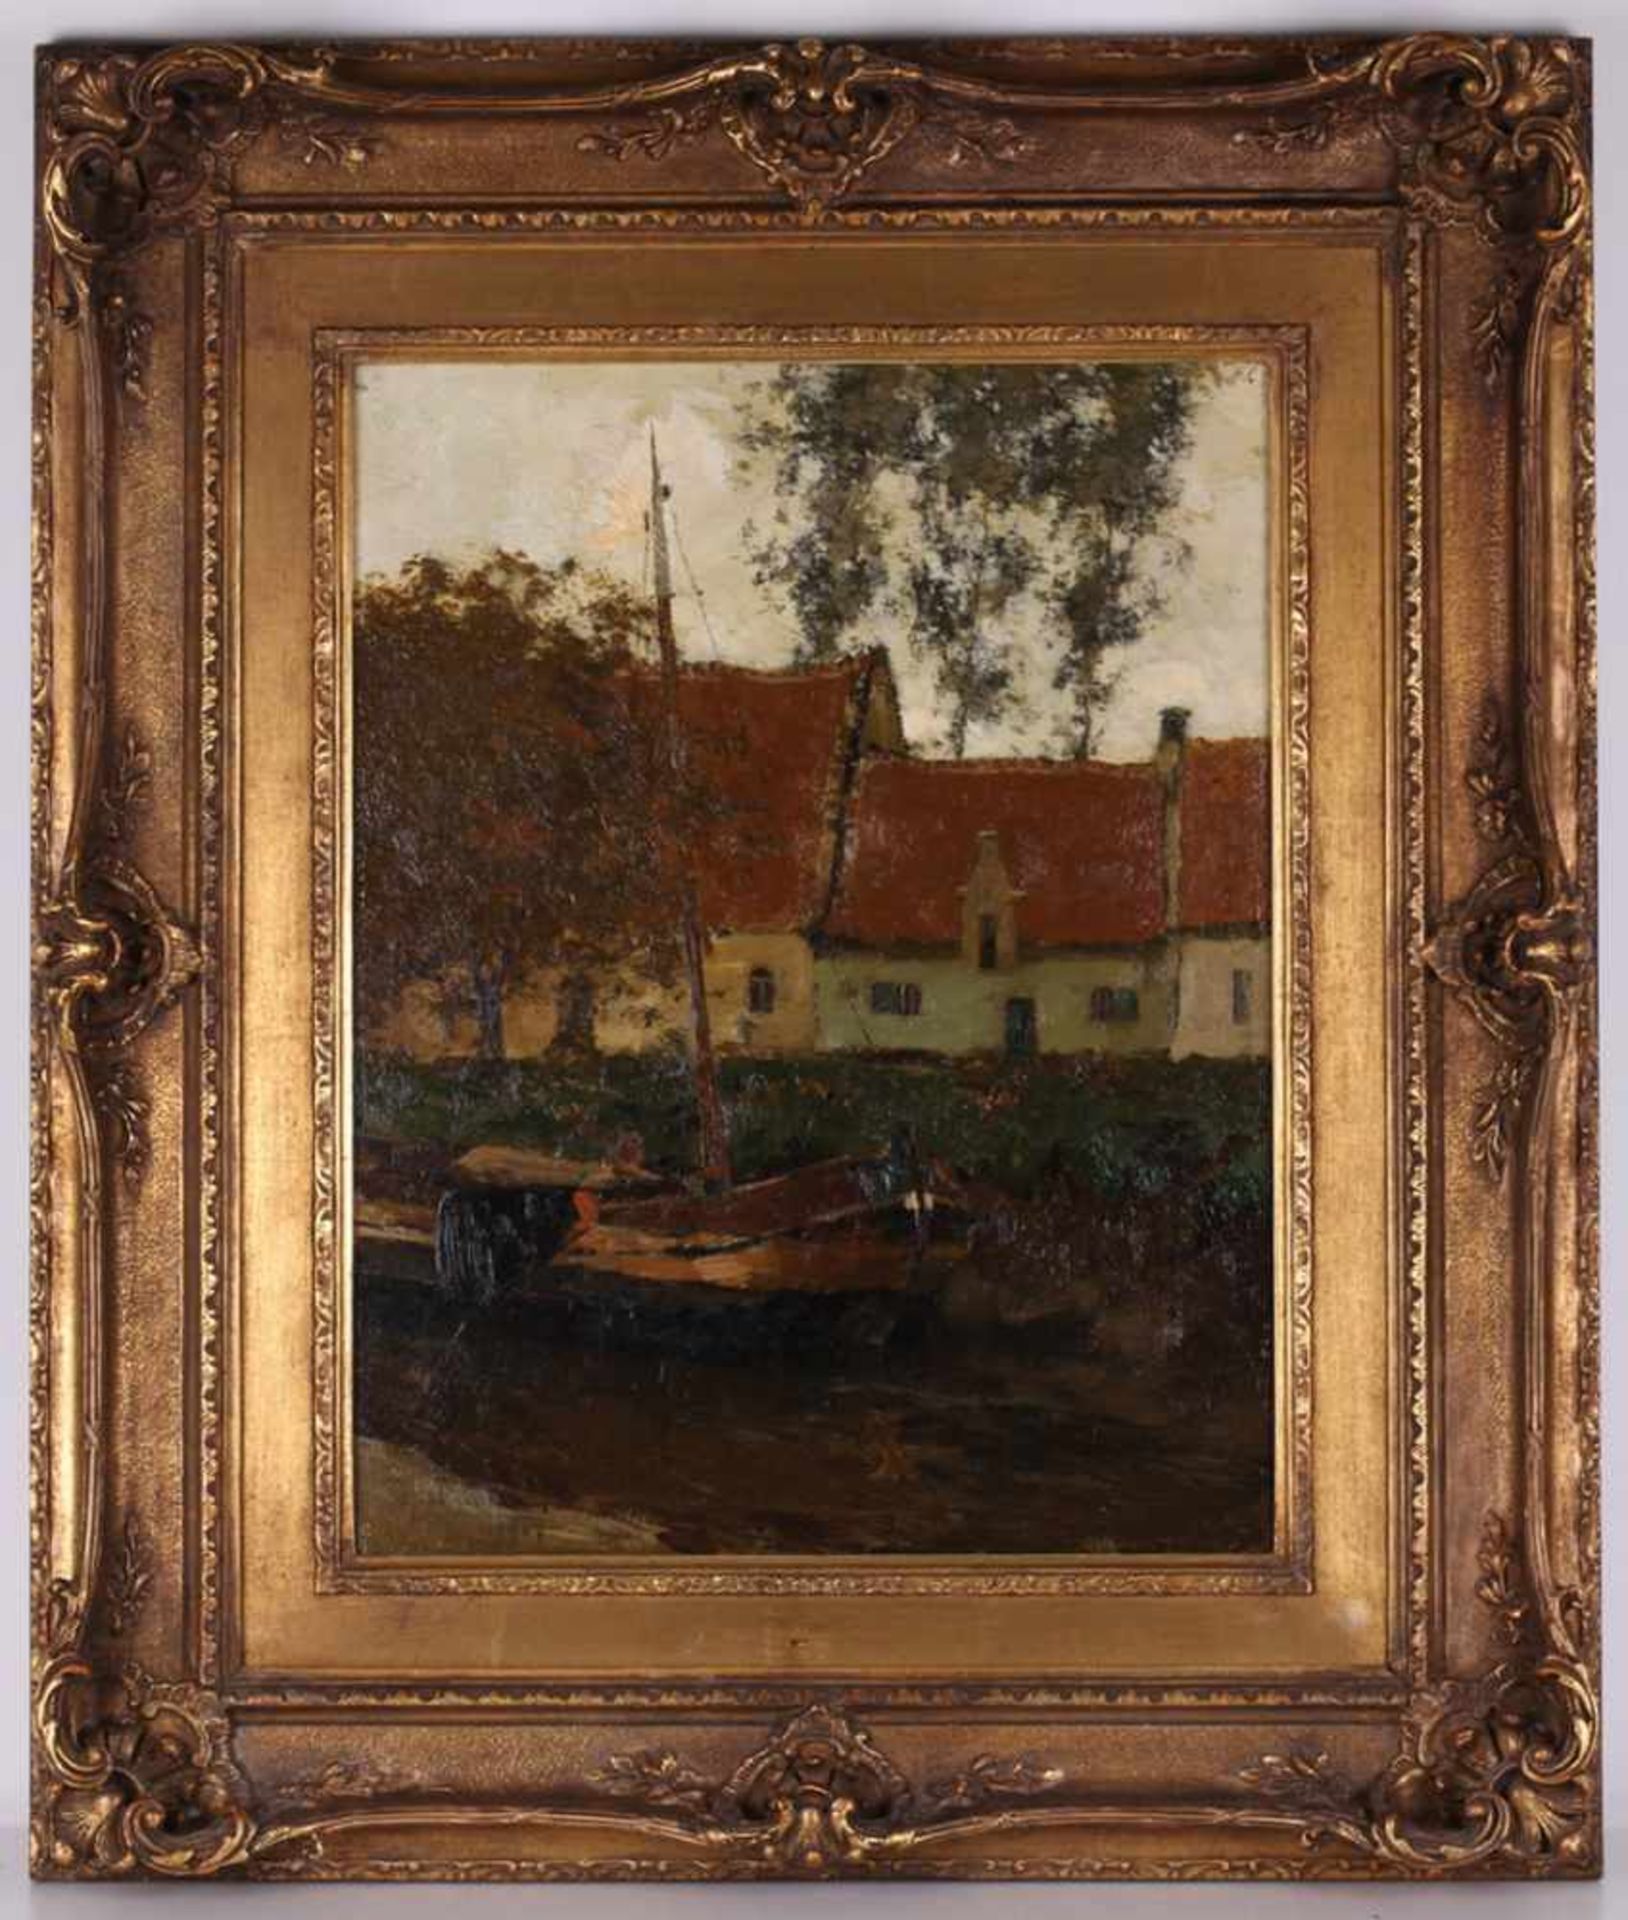 Apol, Armand. Houses with a boat. 1907. Oil on canvas. 54x44 cm.Signed and framed.- - -15.00 % - Image 2 of 3